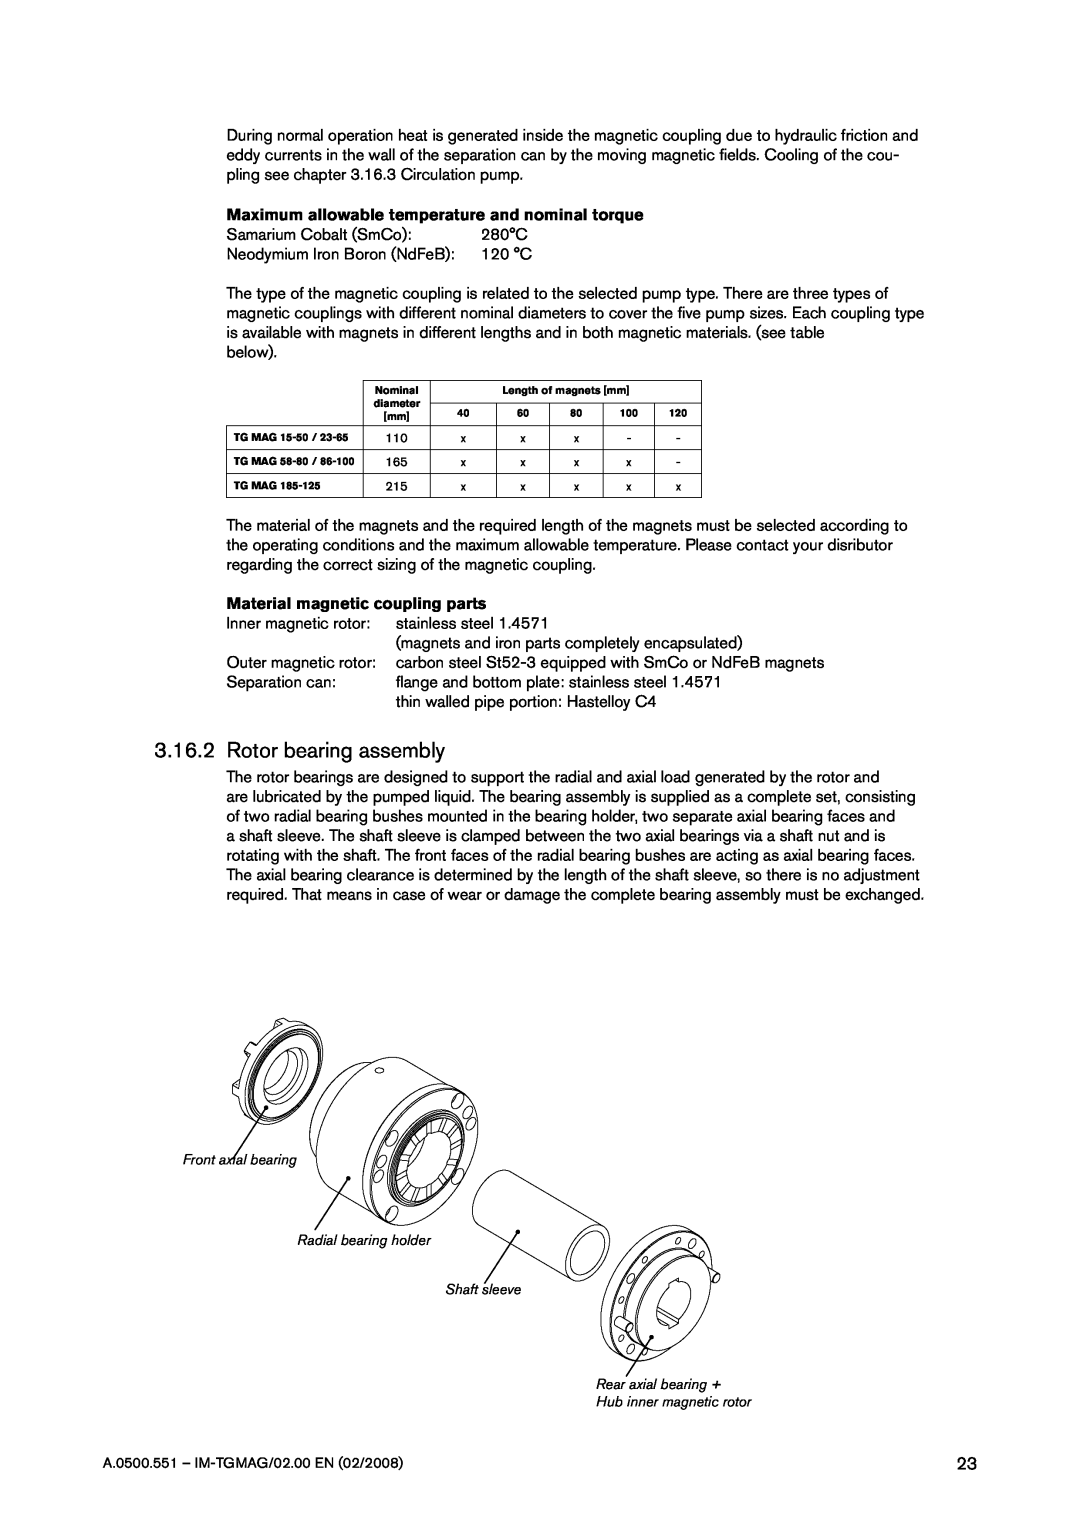 SPX Cooling Technologies TG MAG23-65, TG MAG15-50 Rotor bearing assembly, Maximum allowable temperature and nominal torque 